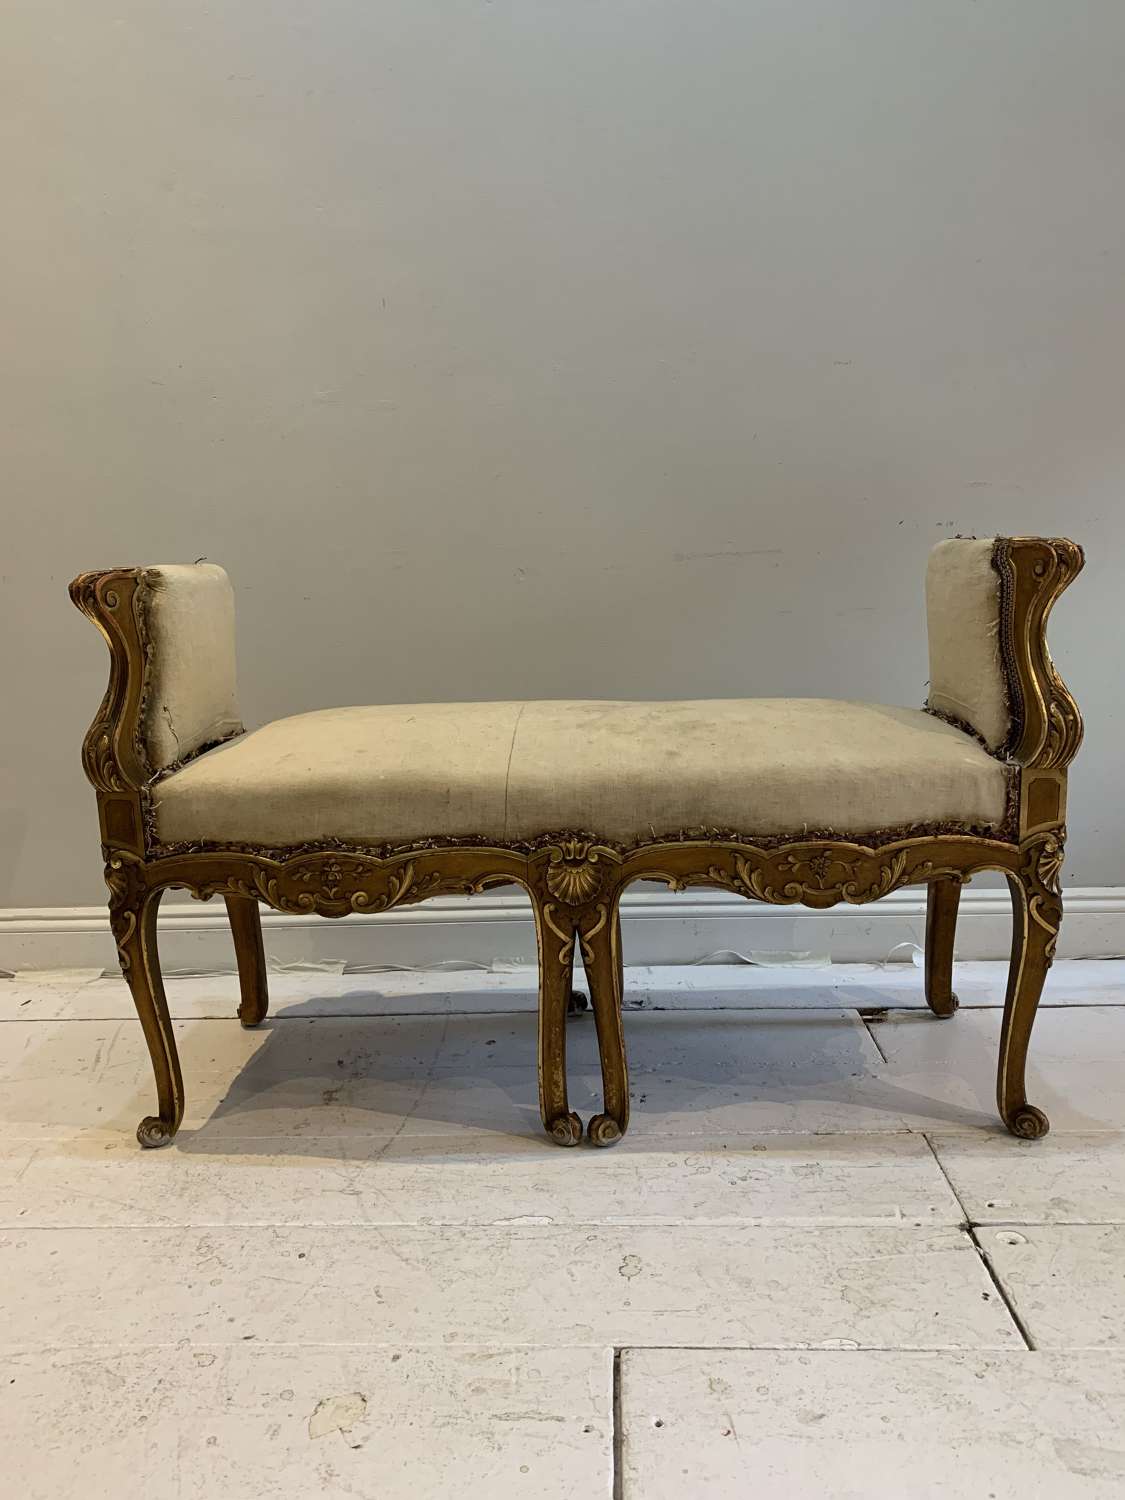 Late C18th country house gilt bench/window seat